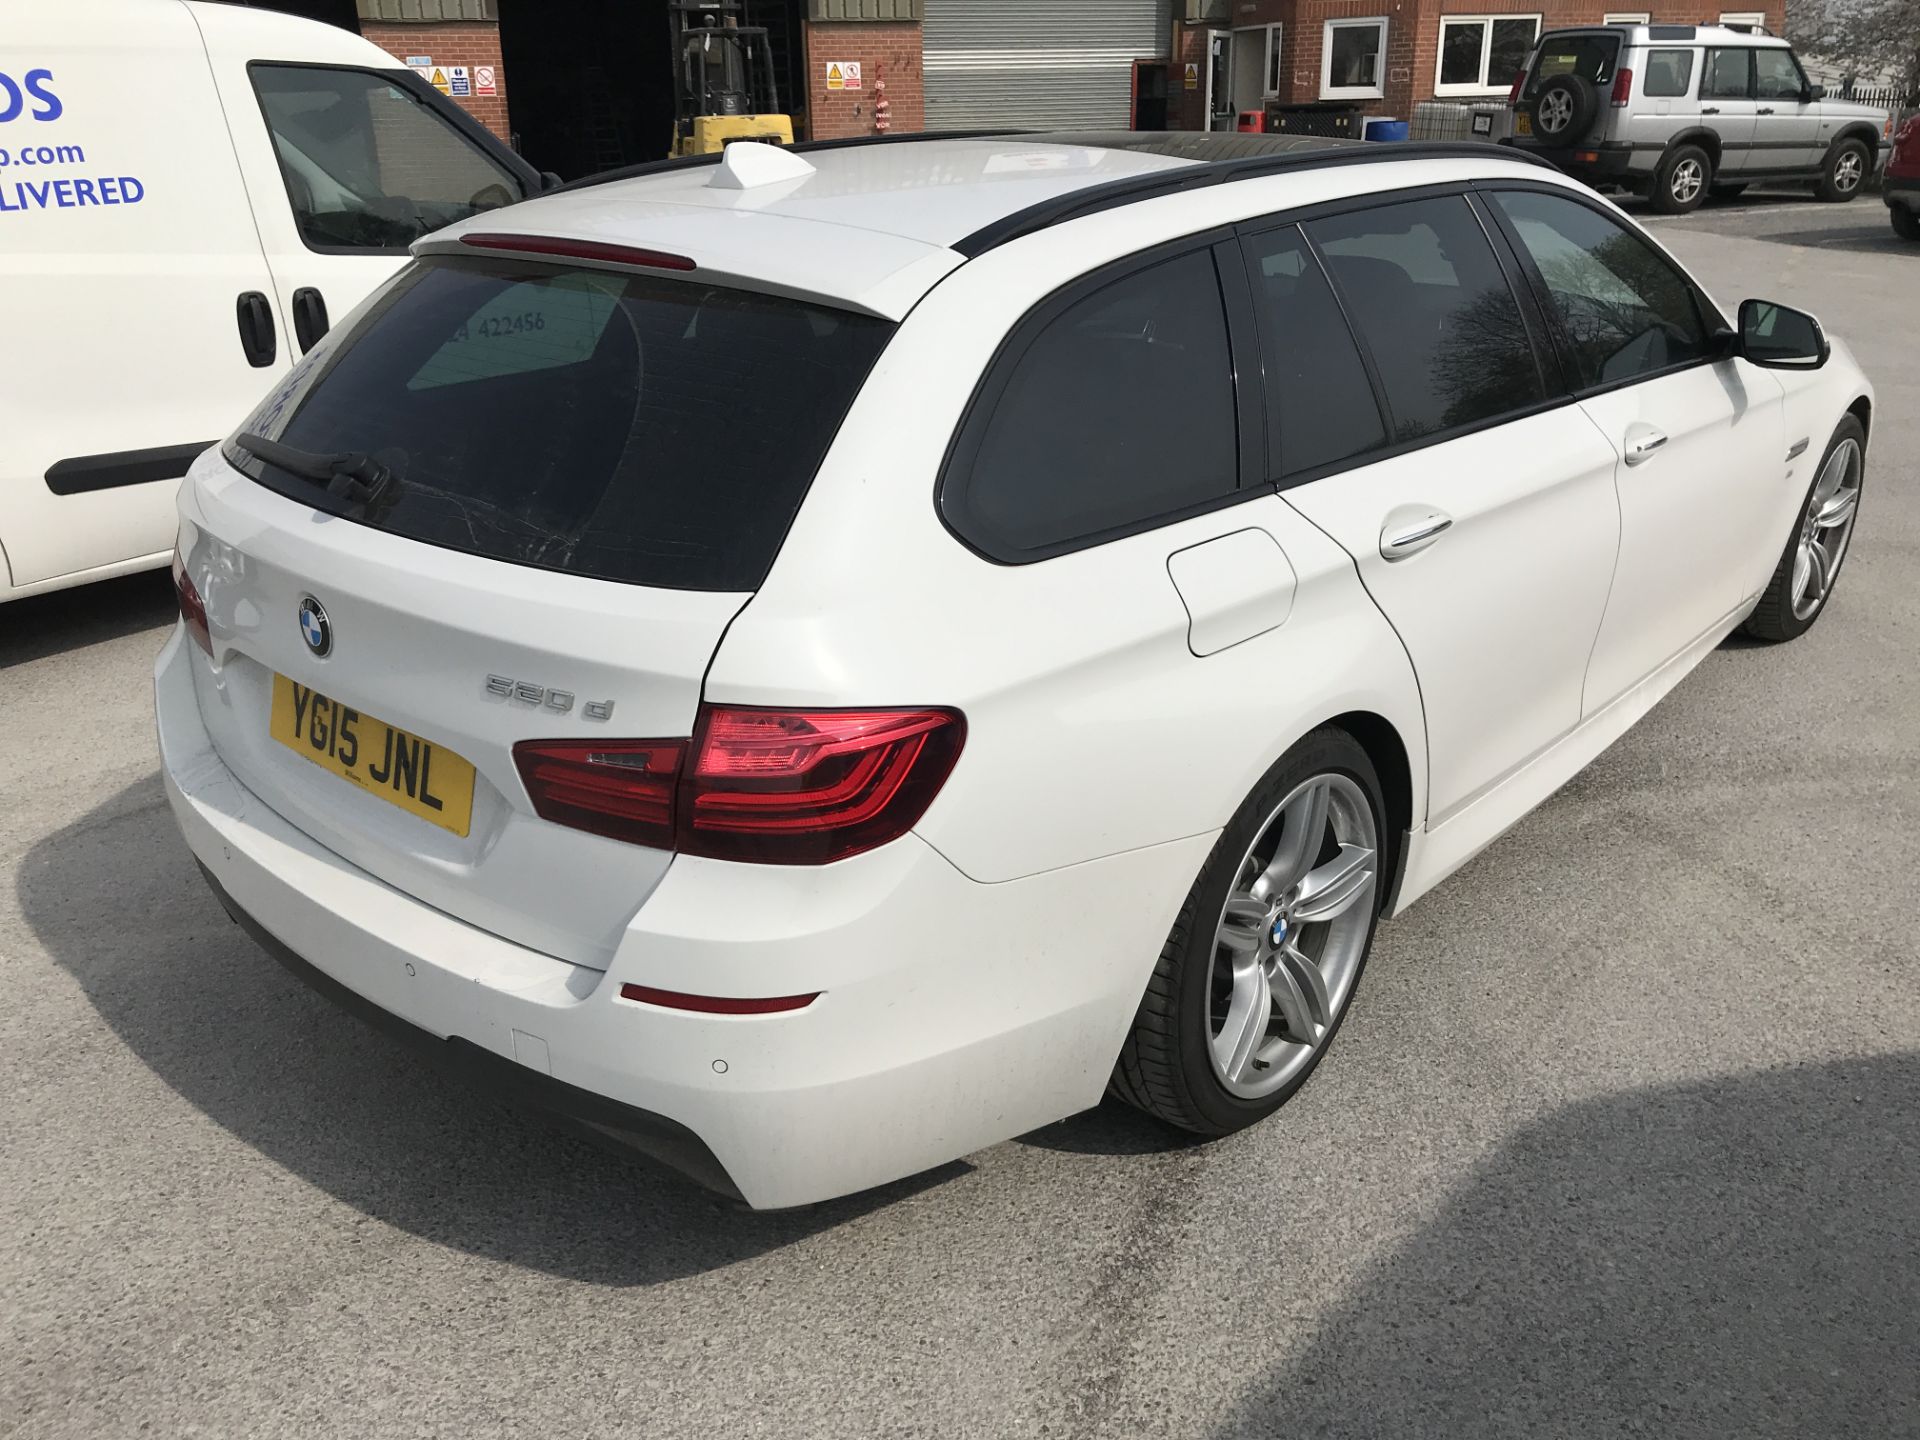 BMW 520d (190) M Sport Touring Five Door Step Automatic, registration no. YG15 JNL, date first - Image 3 of 10